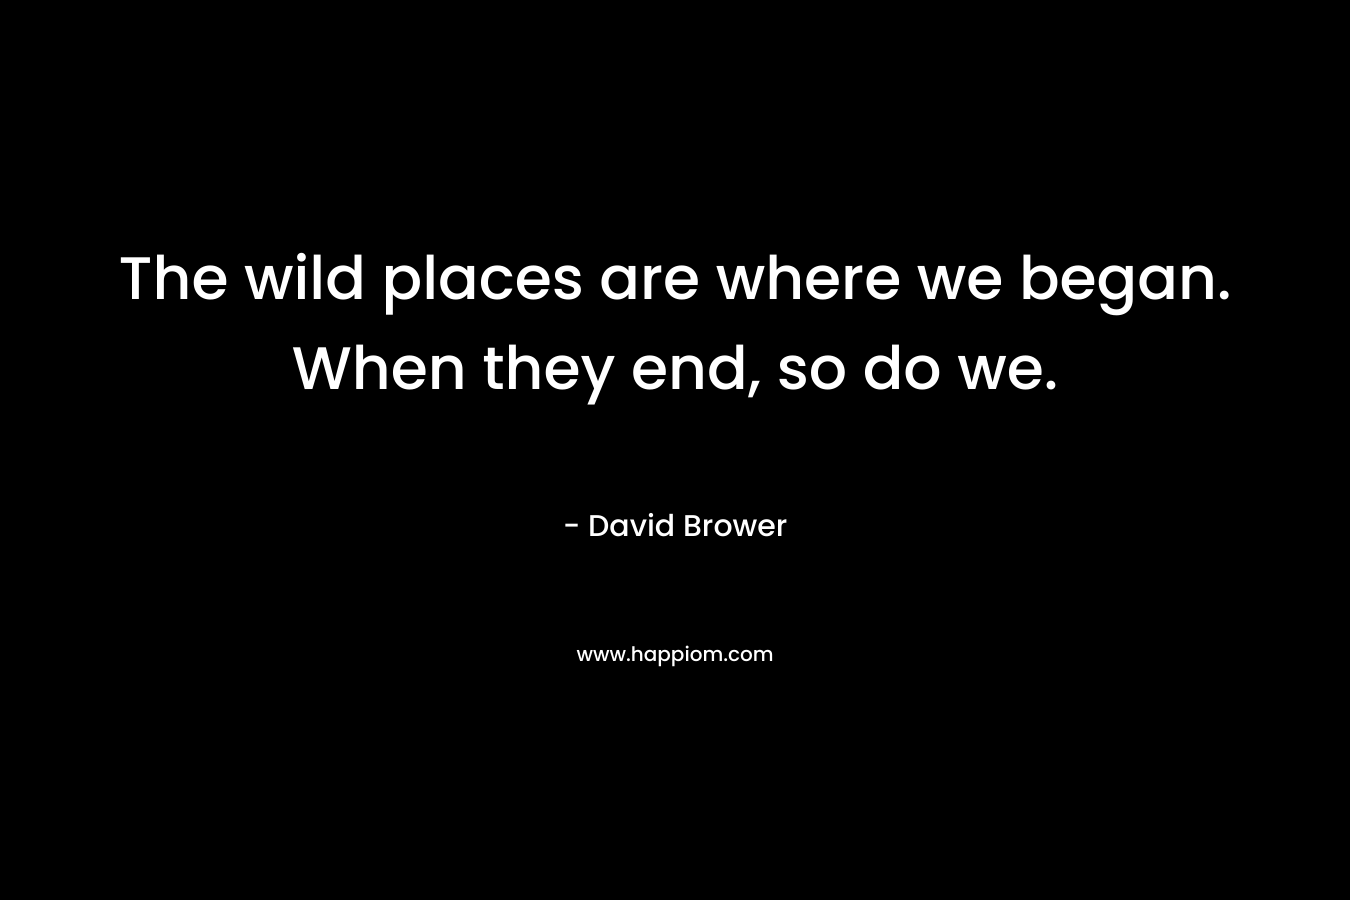 The wild places are where we began. When they end, so do we.